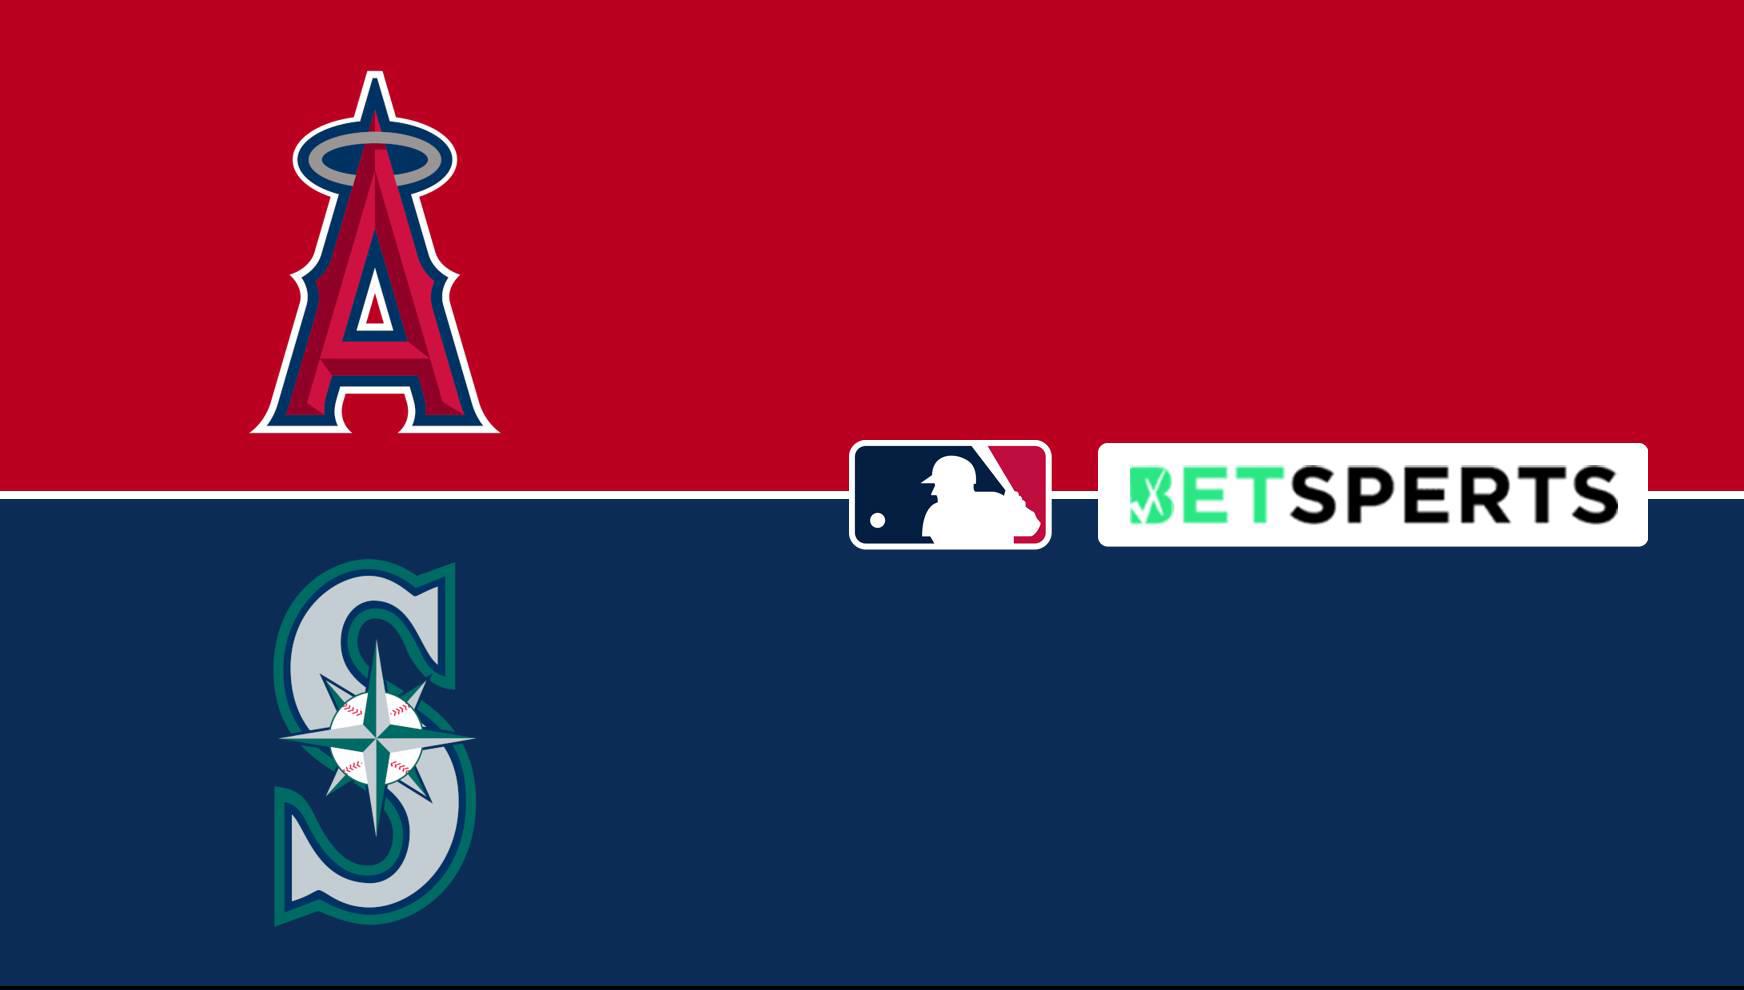 Ty France Preview, Player Props: Mariners vs. Angels